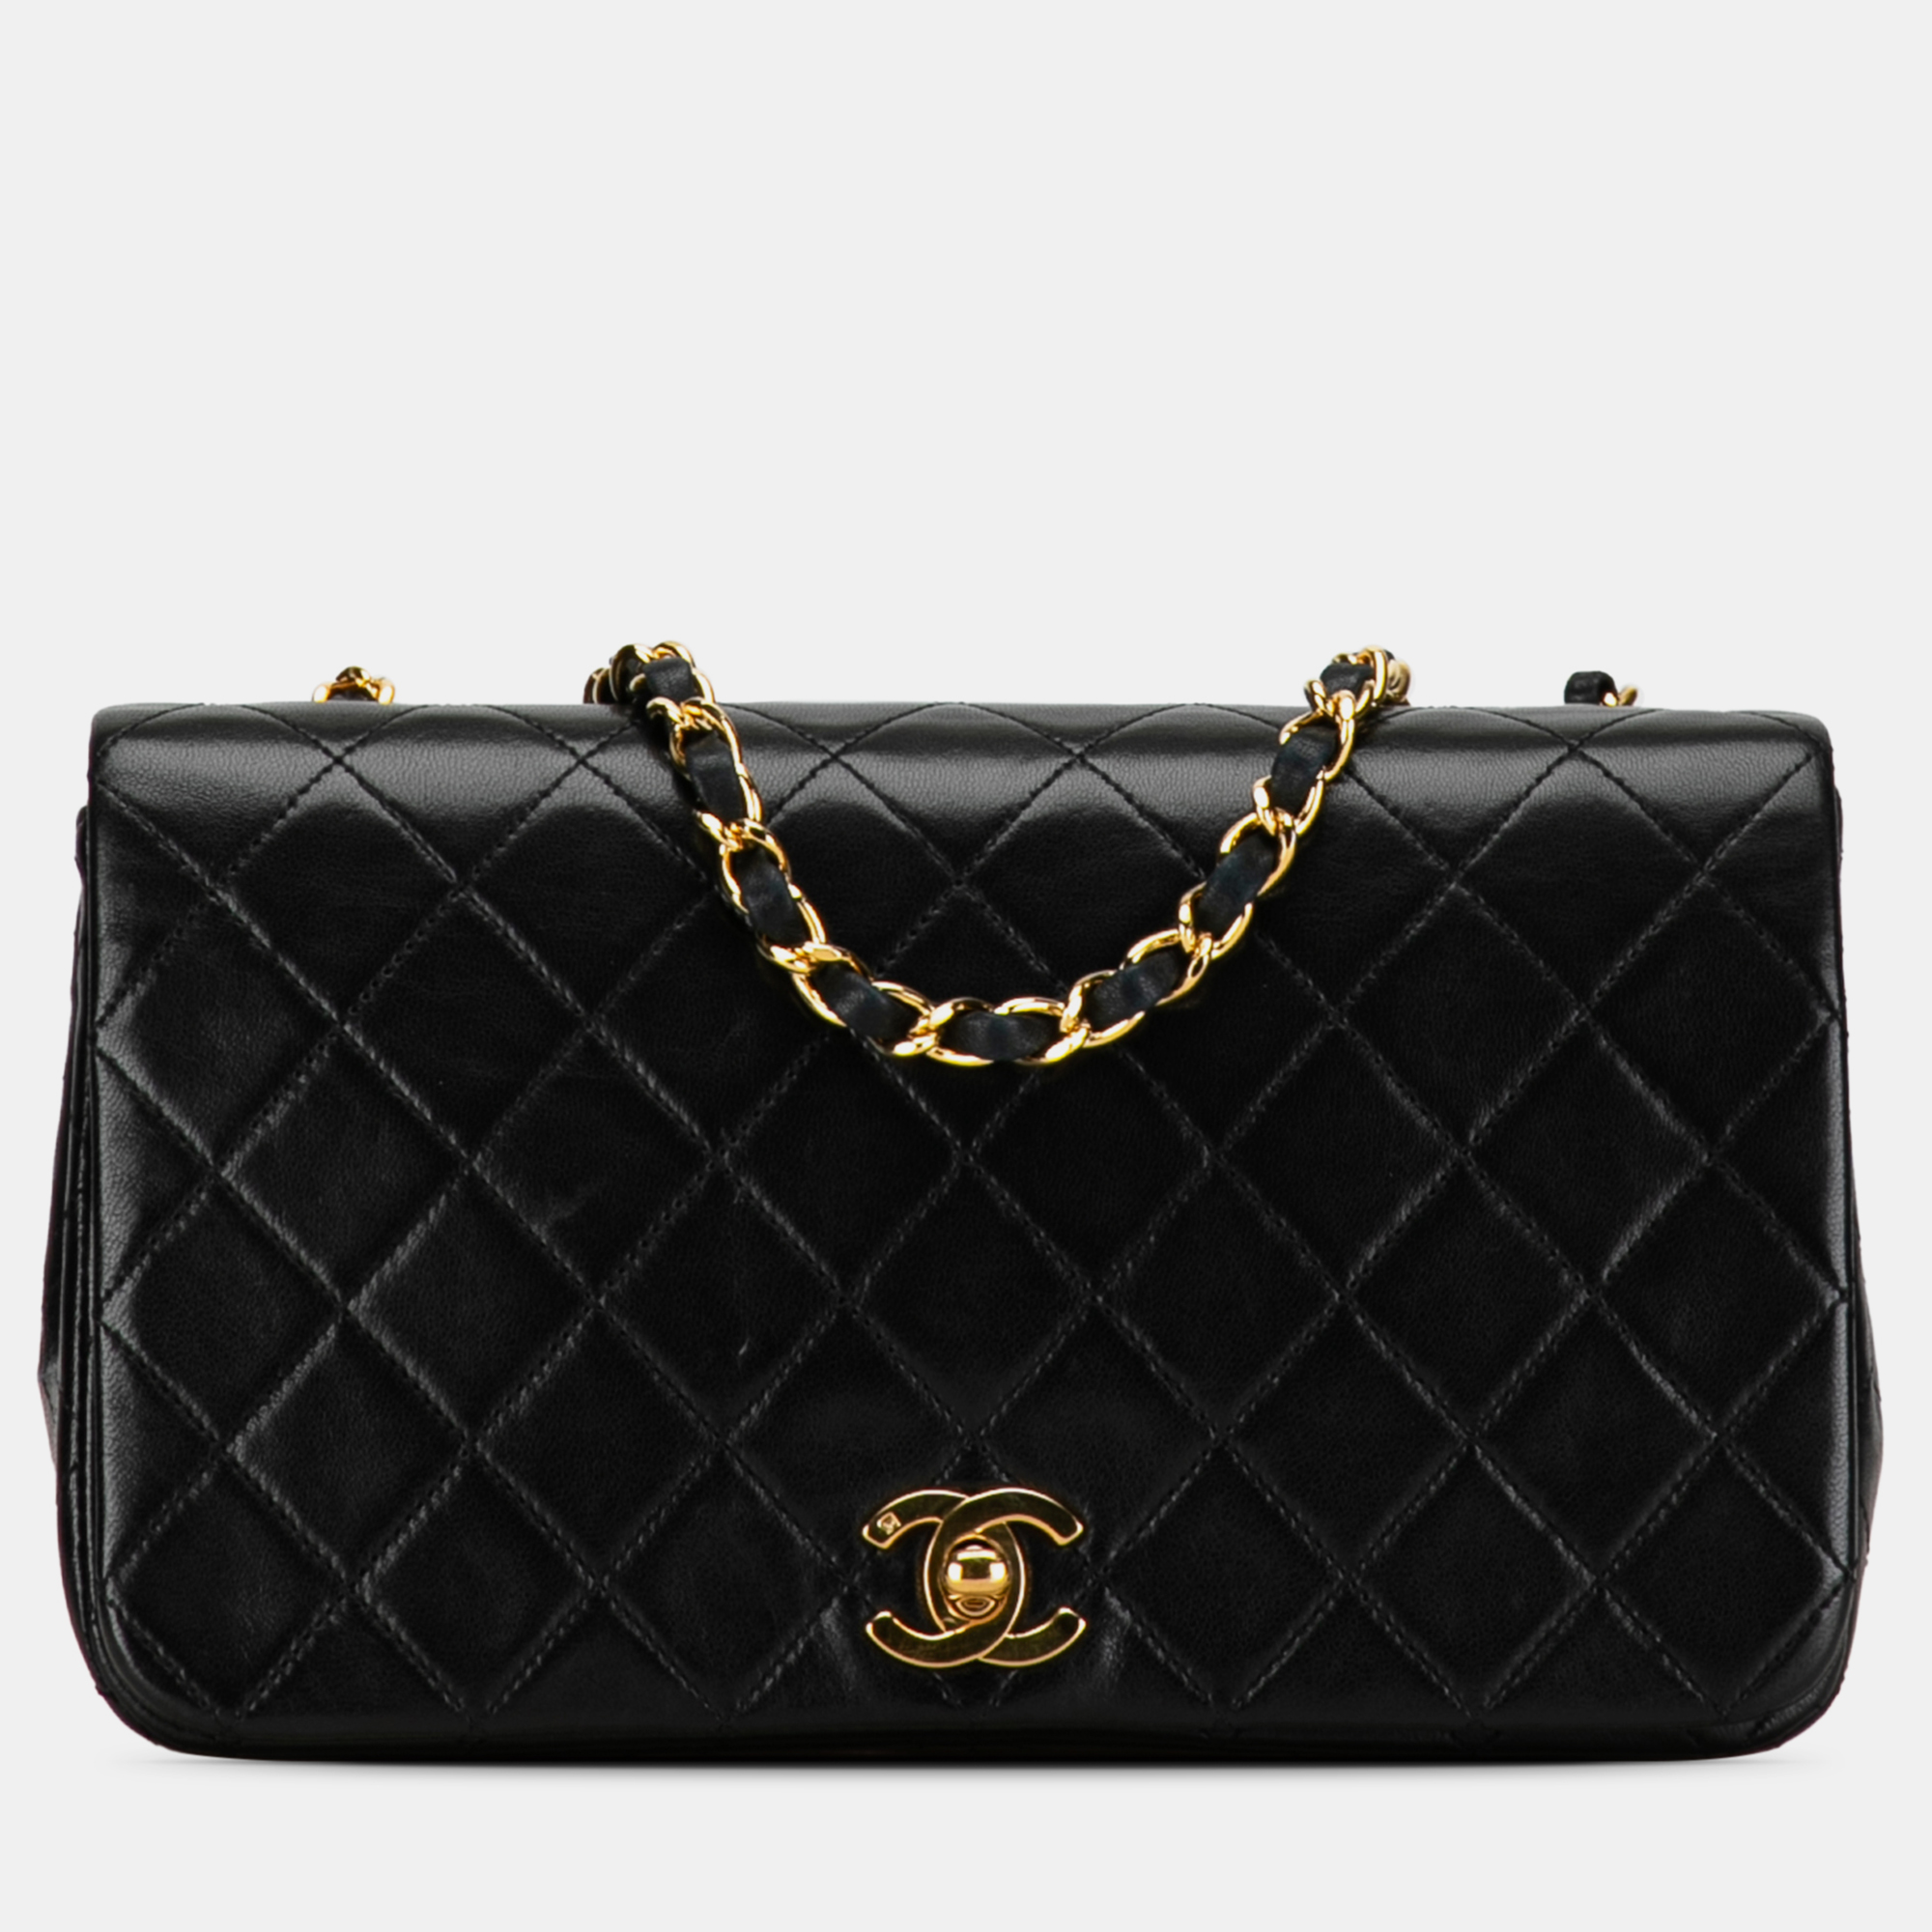 Chanel cc quilted lambskin full flap